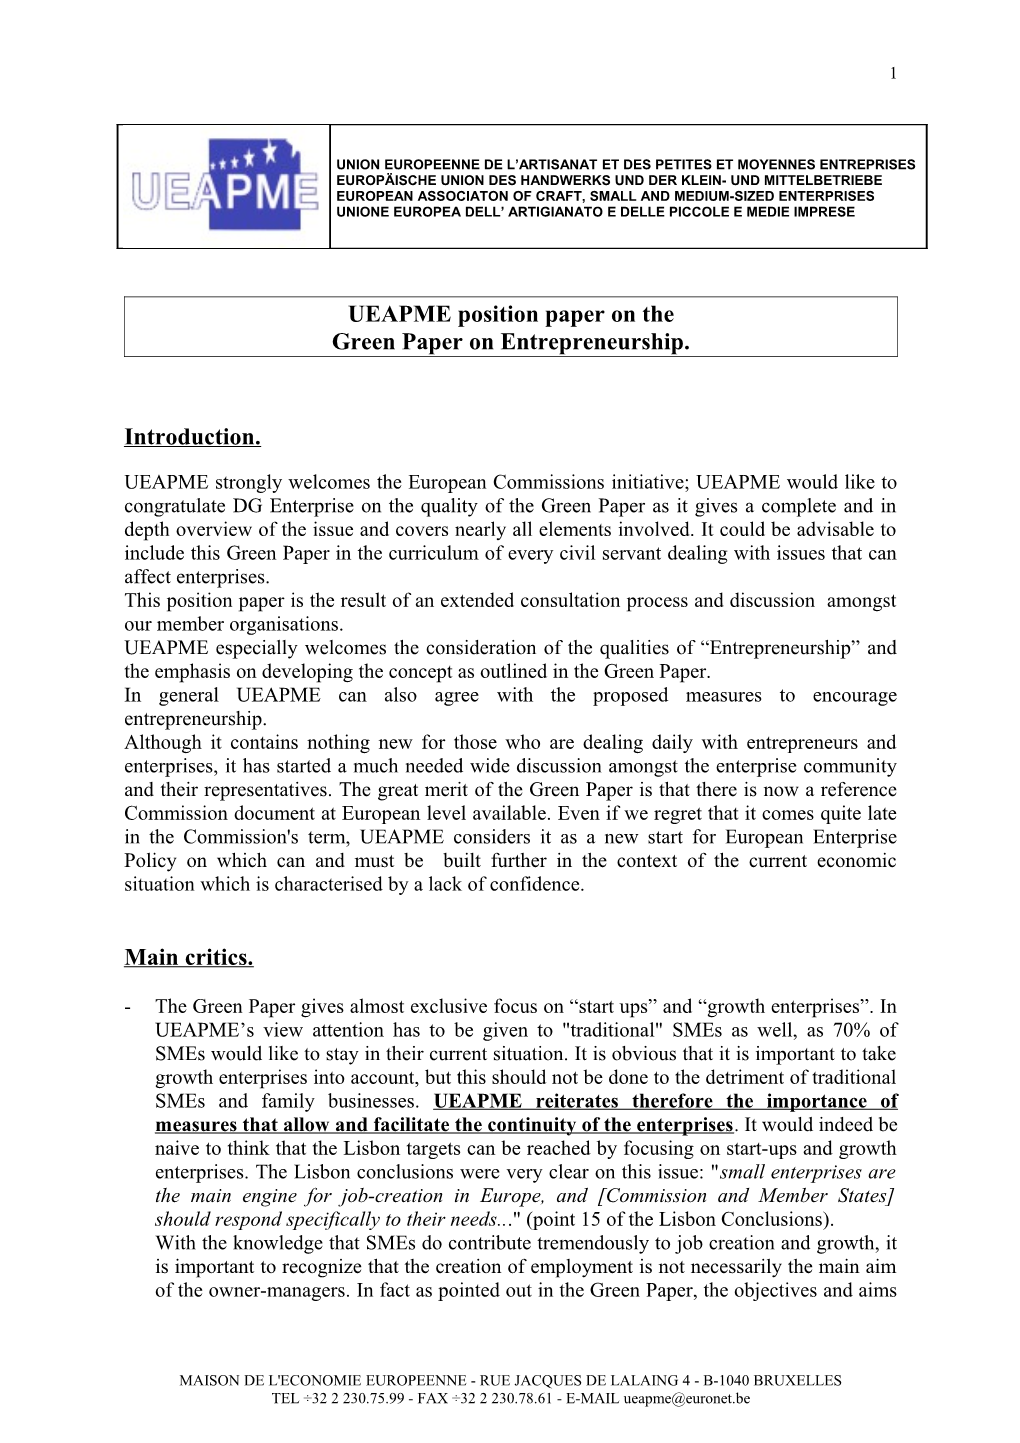 UEAPME Position Paper on The